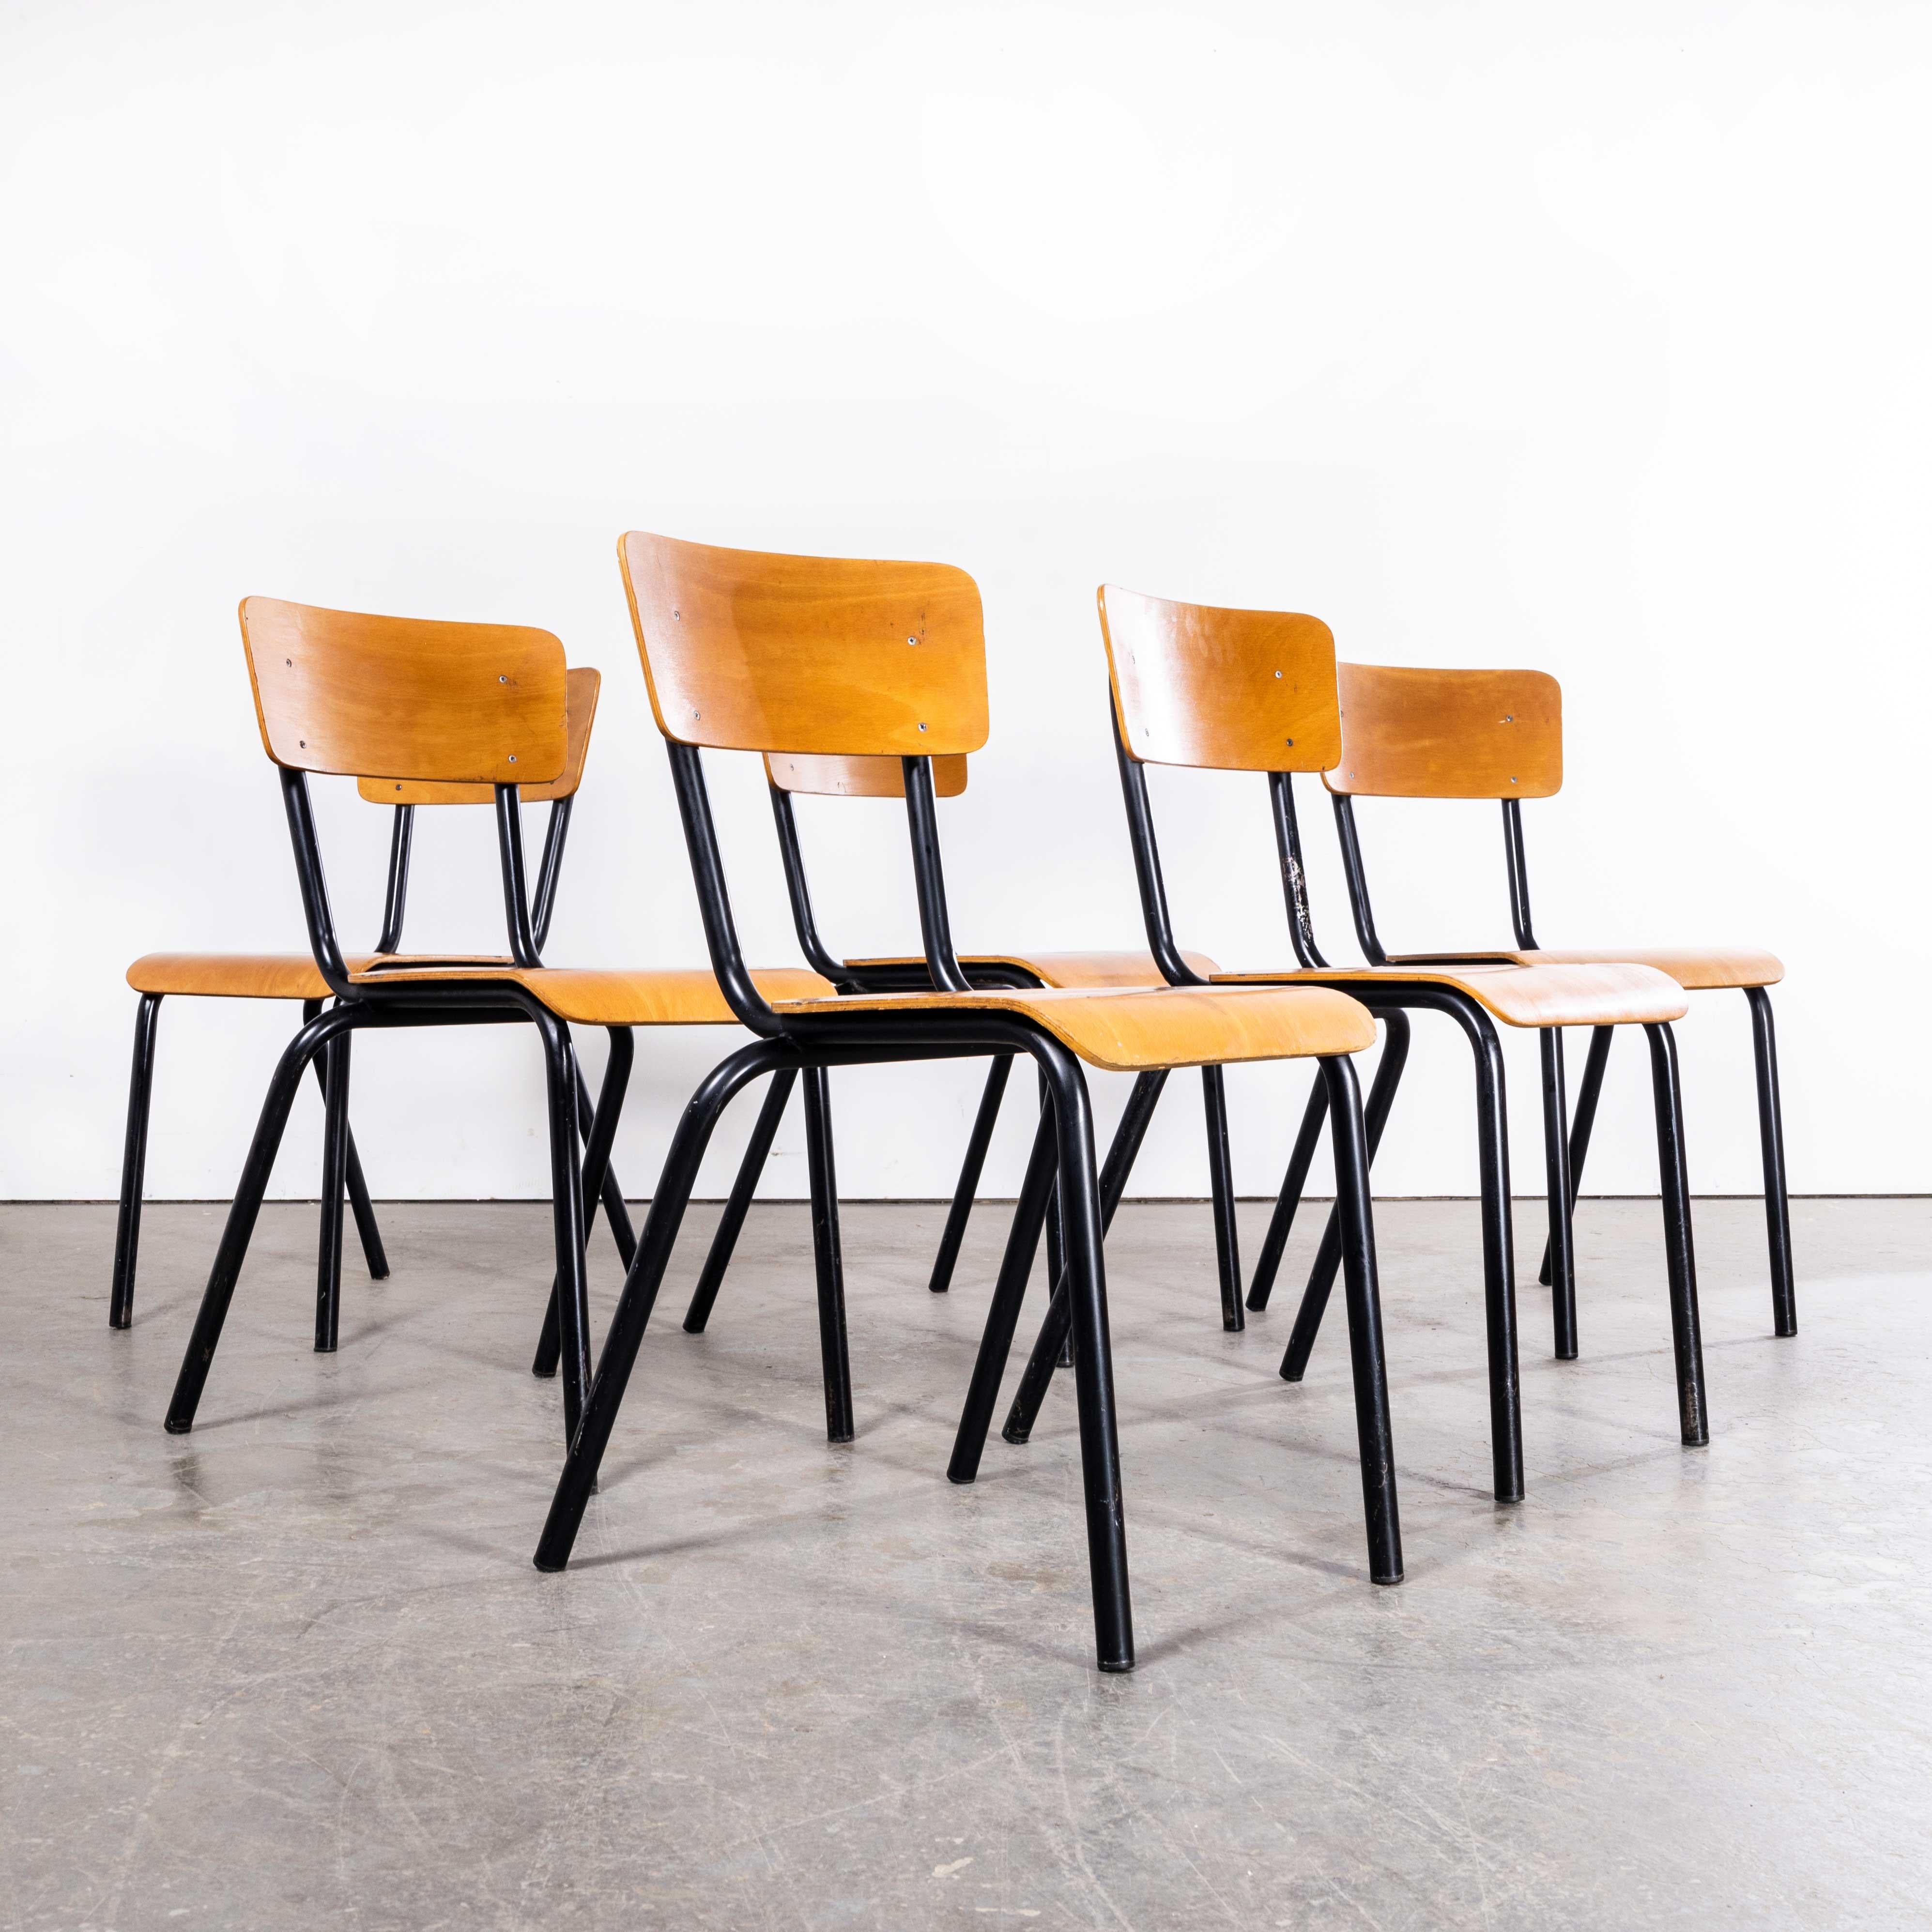 1960’s Original Black French Stacking University Dining Chairs Slim Back – Set Of Six
1960’s Original Black French Stacking University Dining Chairs Slim Back – Set Of Six. High quality classic French University chairs. Black steel frames with clean